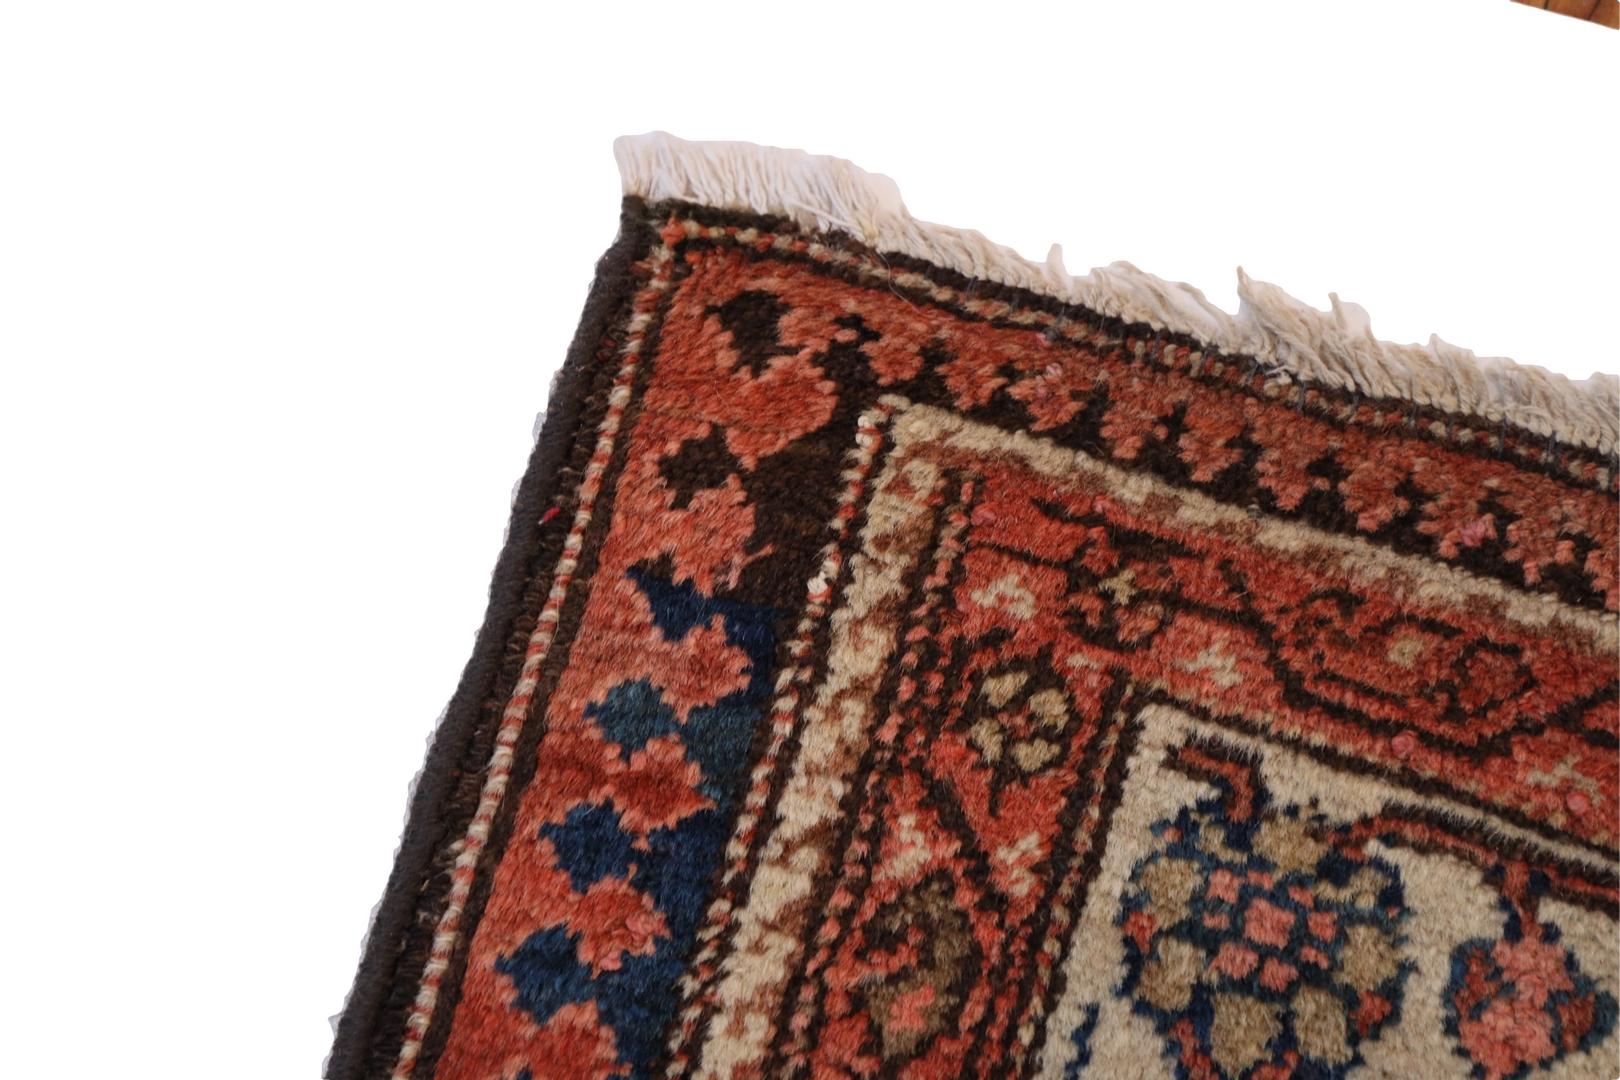 20th Century Malayer Antique Rug, Red Ivory Blue - 4 x 6 For Sale